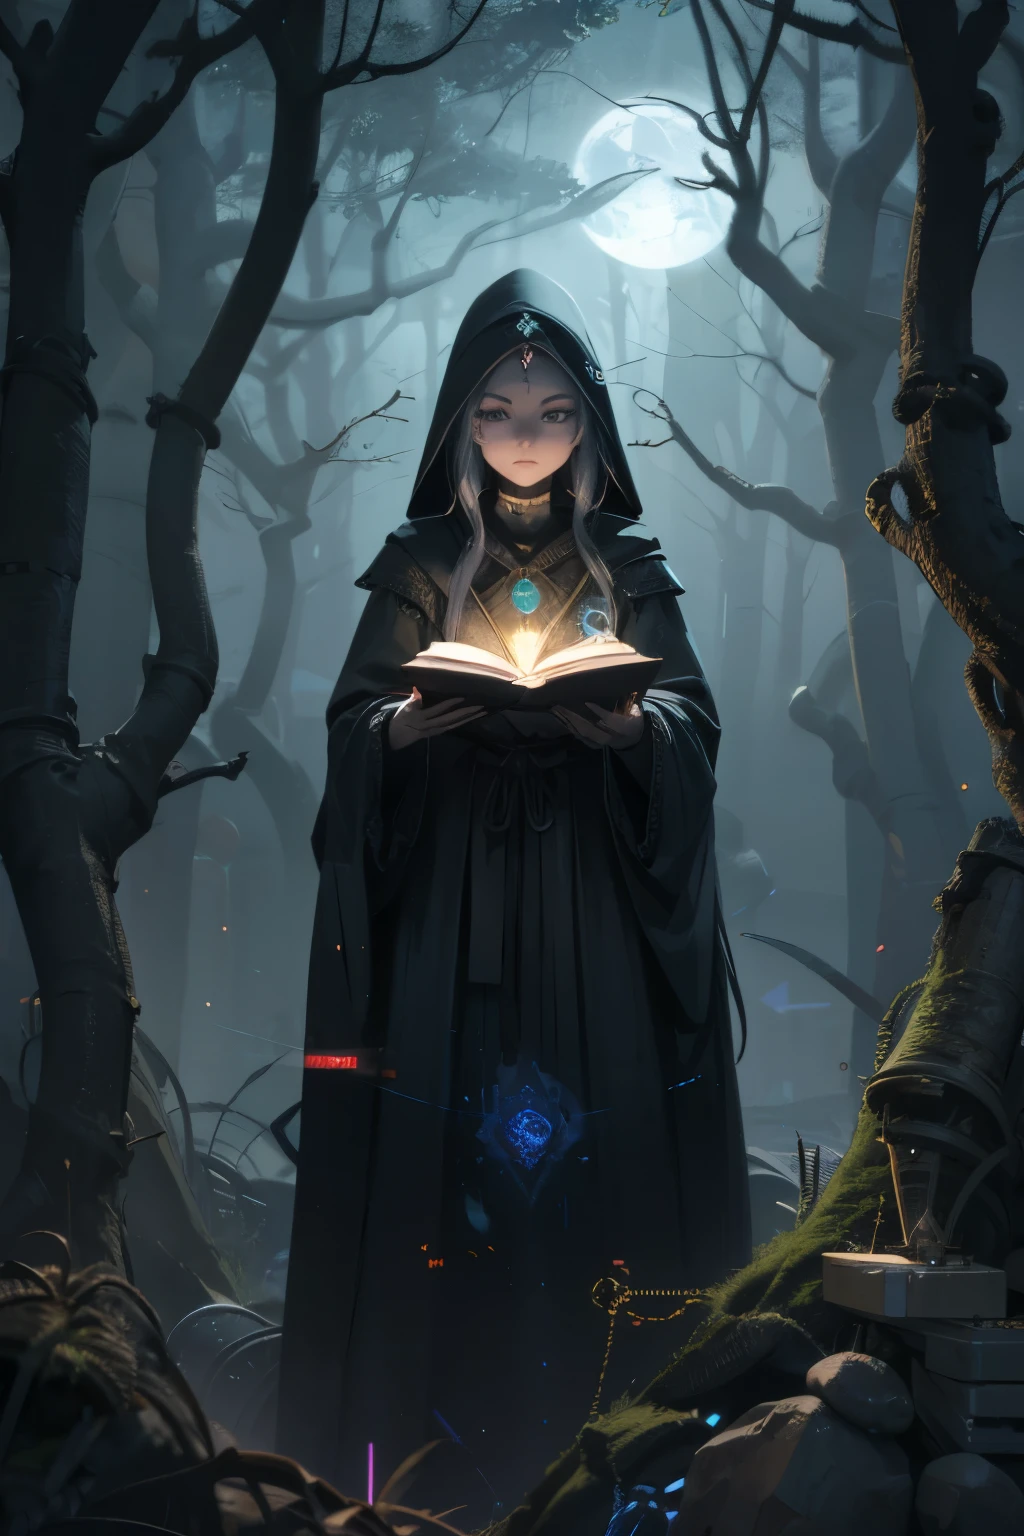 depicts a modern-day witch who has embraced the world of cybernetics to enhance her magical abilities. The artwork should convey the enchanting blend of traditional witchcraft and futuristic technology. Here are some specific elements to include: The Witch's Lair: The setting should be a cozy yet slightly eerie room, filled with magical books, crystal balls, potion ingredients, and antique furnishings. The room should be dimly lit by candles and a soft, mystical glow emanating from her cybernetic enhancements. The Cyborg Witch: The central focus of the artwork is the witch herself. She's a striking figure with a mix of traditional witch attire and cybernetic enhancements. Her clothing should have a witchy, occult aesthetic, with flowing robes, a pointed hat, and an intricate pentagram necklace. Her arms, however, have been upgraded with cybernetic components that incorporate magical symbols and glowing runes. Magical Interface: The witch is in the midst of casting a spell, with a holographic, touch-screen interface floating before her. This interface includes spell incantations, arcane symbols, and digital components, demonstrating her fusion of magic and technology. Spell Ingredients: On a nearby table, there should be a collection of spell ingredients, like herbs, potions, and magical artifacts. Some of these items may have been modified with cybernetic enhancements, blurring the line between the natural and the technological. Familiar: The witch's familiar, perhaps a cat or raven, should be present in the scene, serving as her magical companion. The familiar could also have subtle cybernetic enhancements or glowing eyes. Glowing Runes: The room should be adorned with ancient symbols and glowing runes on the walls and floor, contributing to the magical atmosphere. Aetherial Lighting: Use a combination of mystical, ethereal lighting and cybernetic glows to create a captivating interplay of light and shadow. The contrast between the tradit